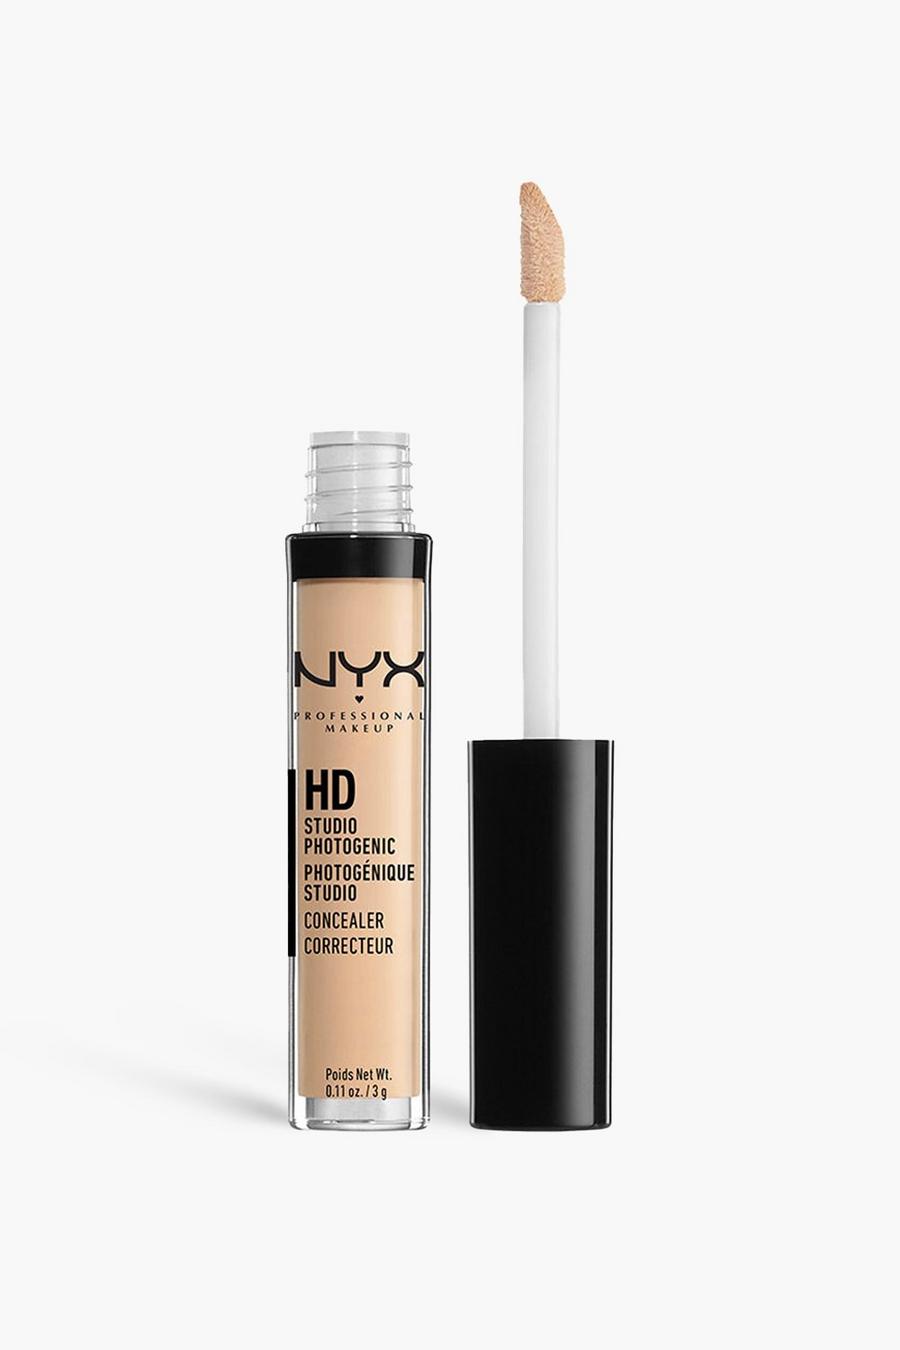 3.5 nude beige NYX Professional Makeup HD Photogenic Concealer Wand